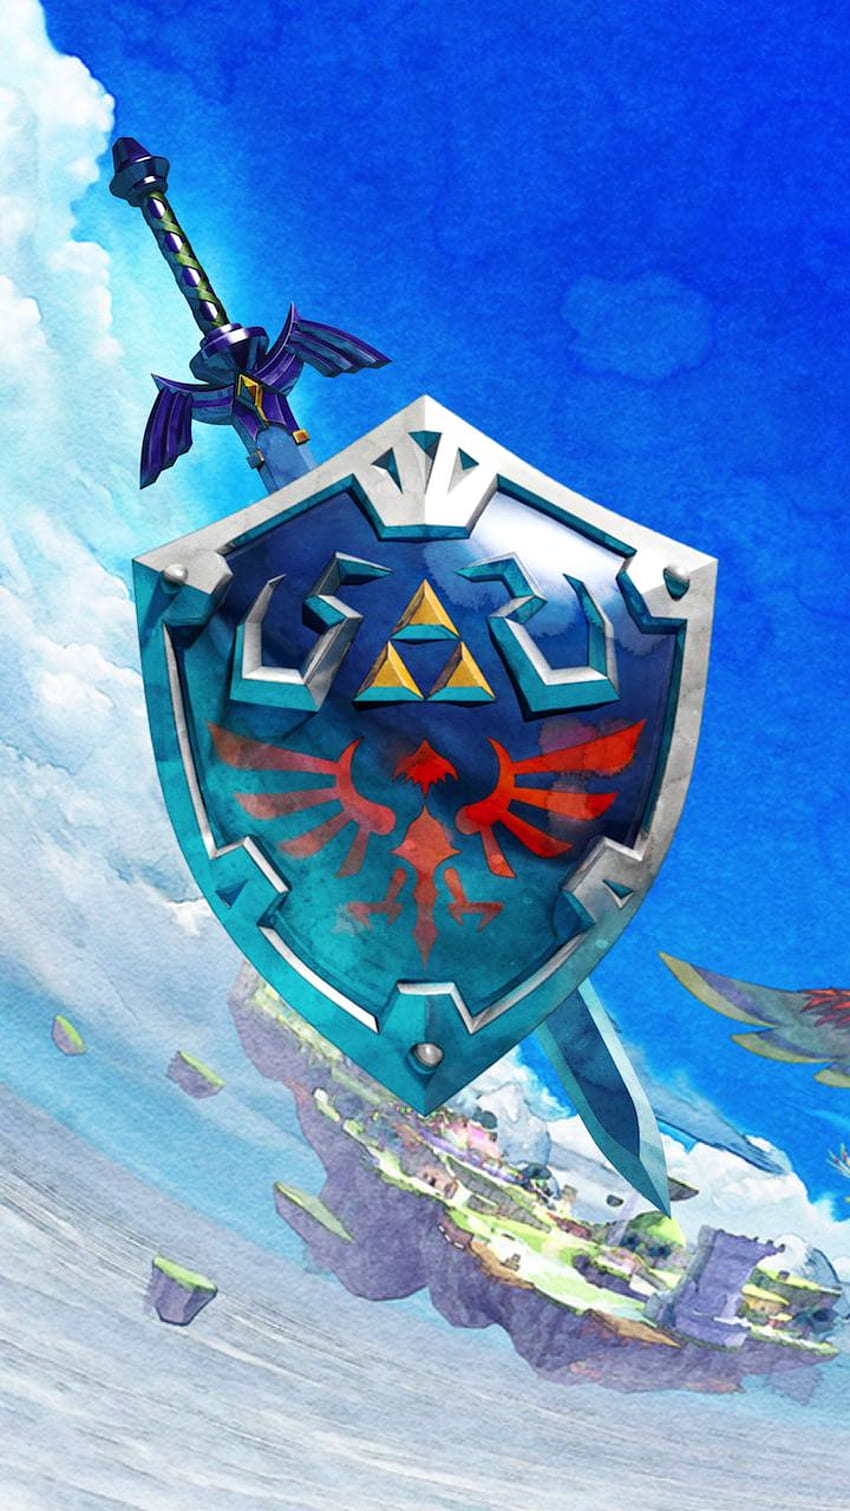 How do you guys like this iPhone I made? : zelda, The Legend of Zelda HD phone wallpaper